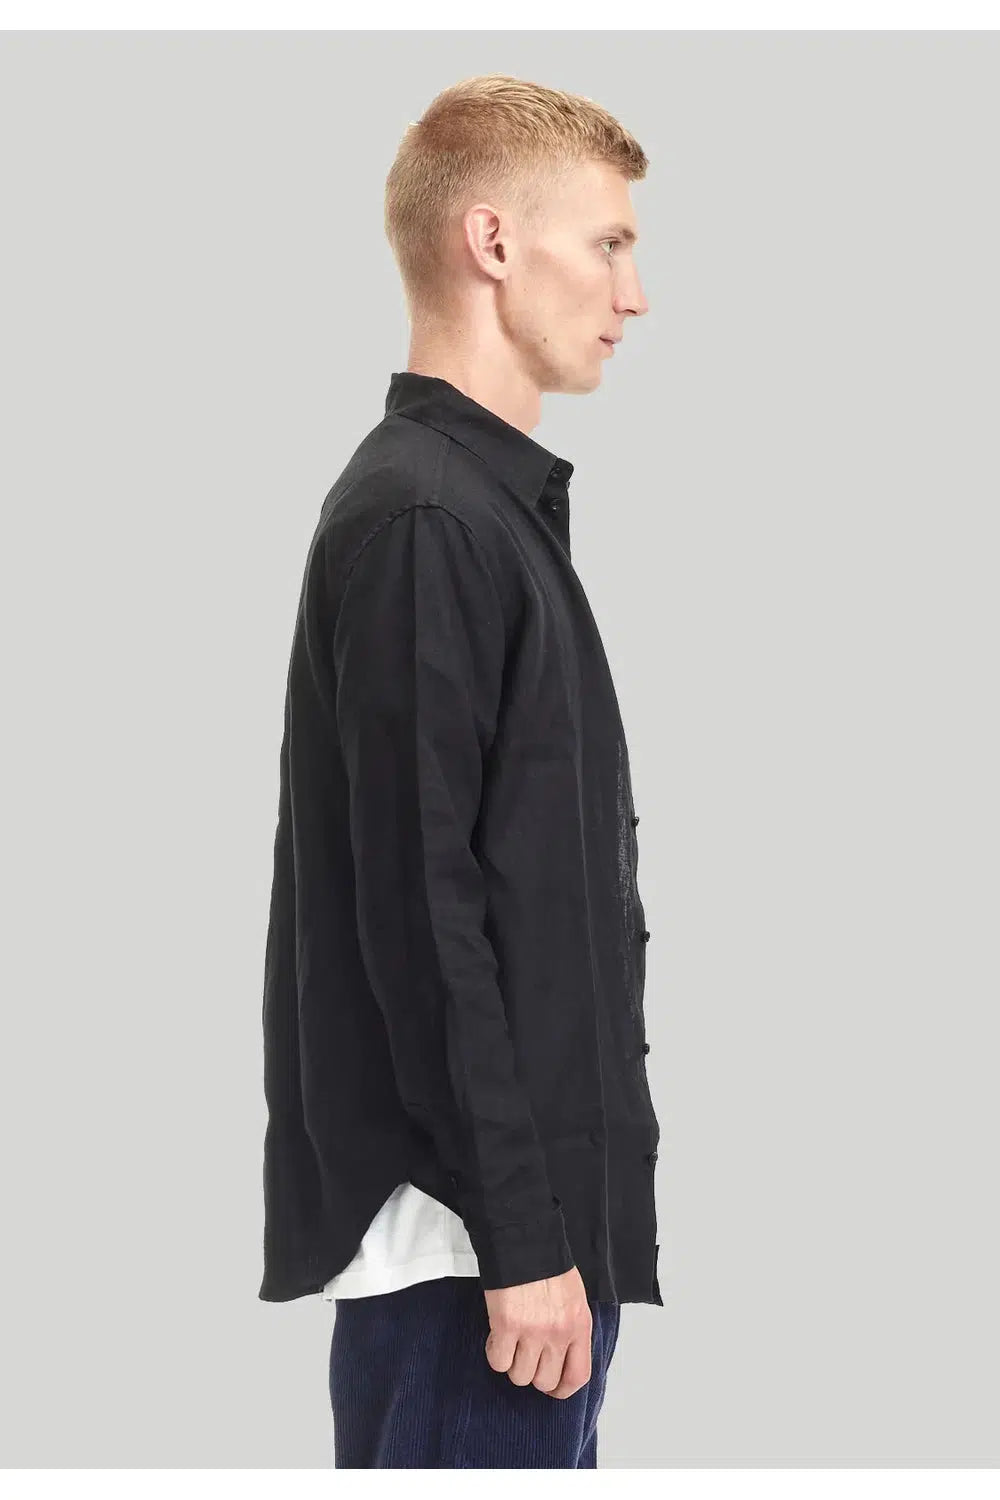 Commoners Mens Classic Linen Shirt - Black | COMMONERS | Mad About The Boy